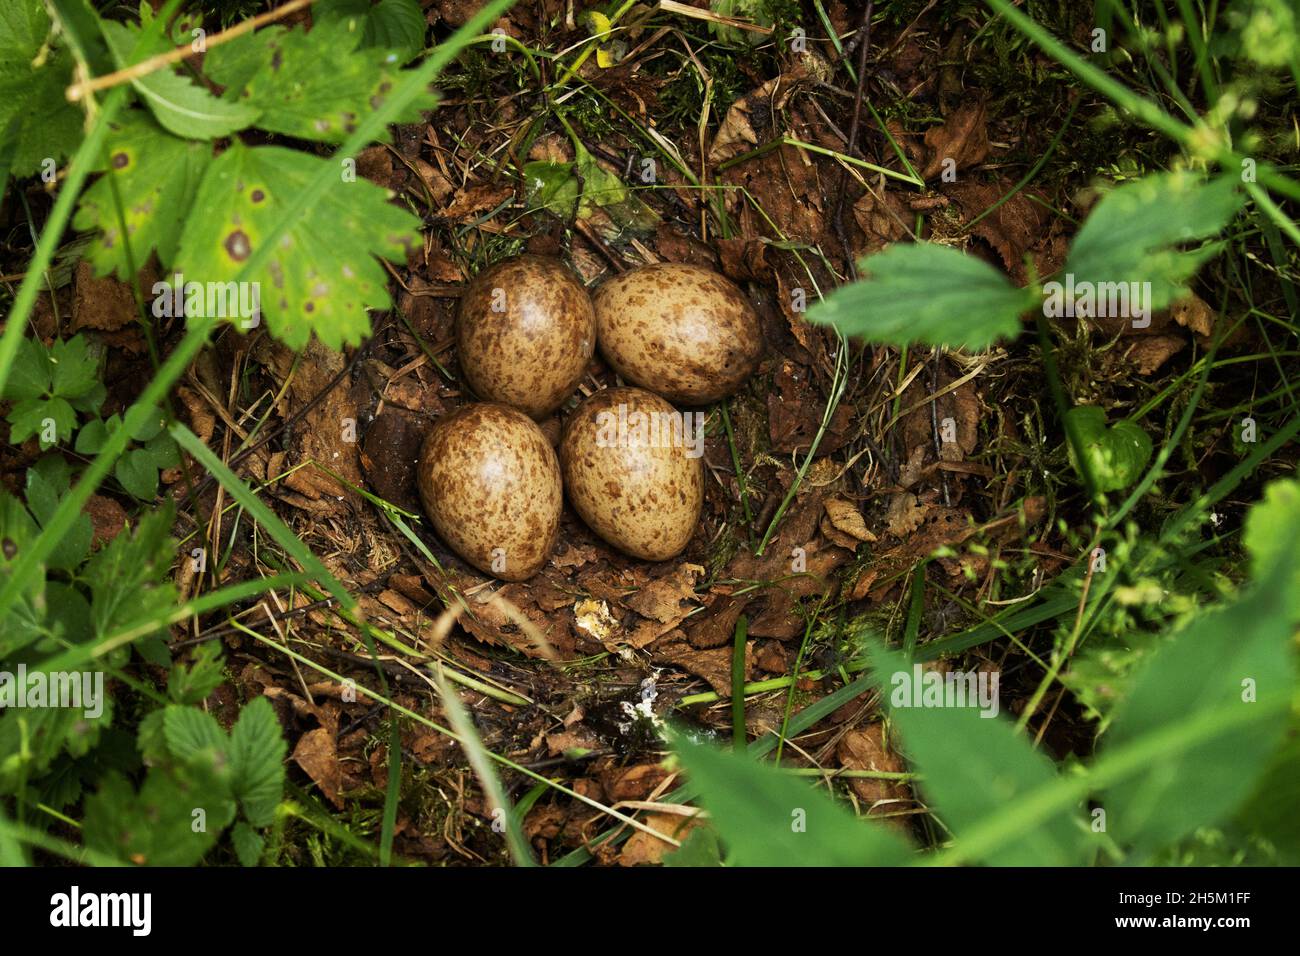 A nest with four eggs of a Eurasian woodcock, Scolopax rusticola in Estonian boreal forest during breeding season. Stock Photo